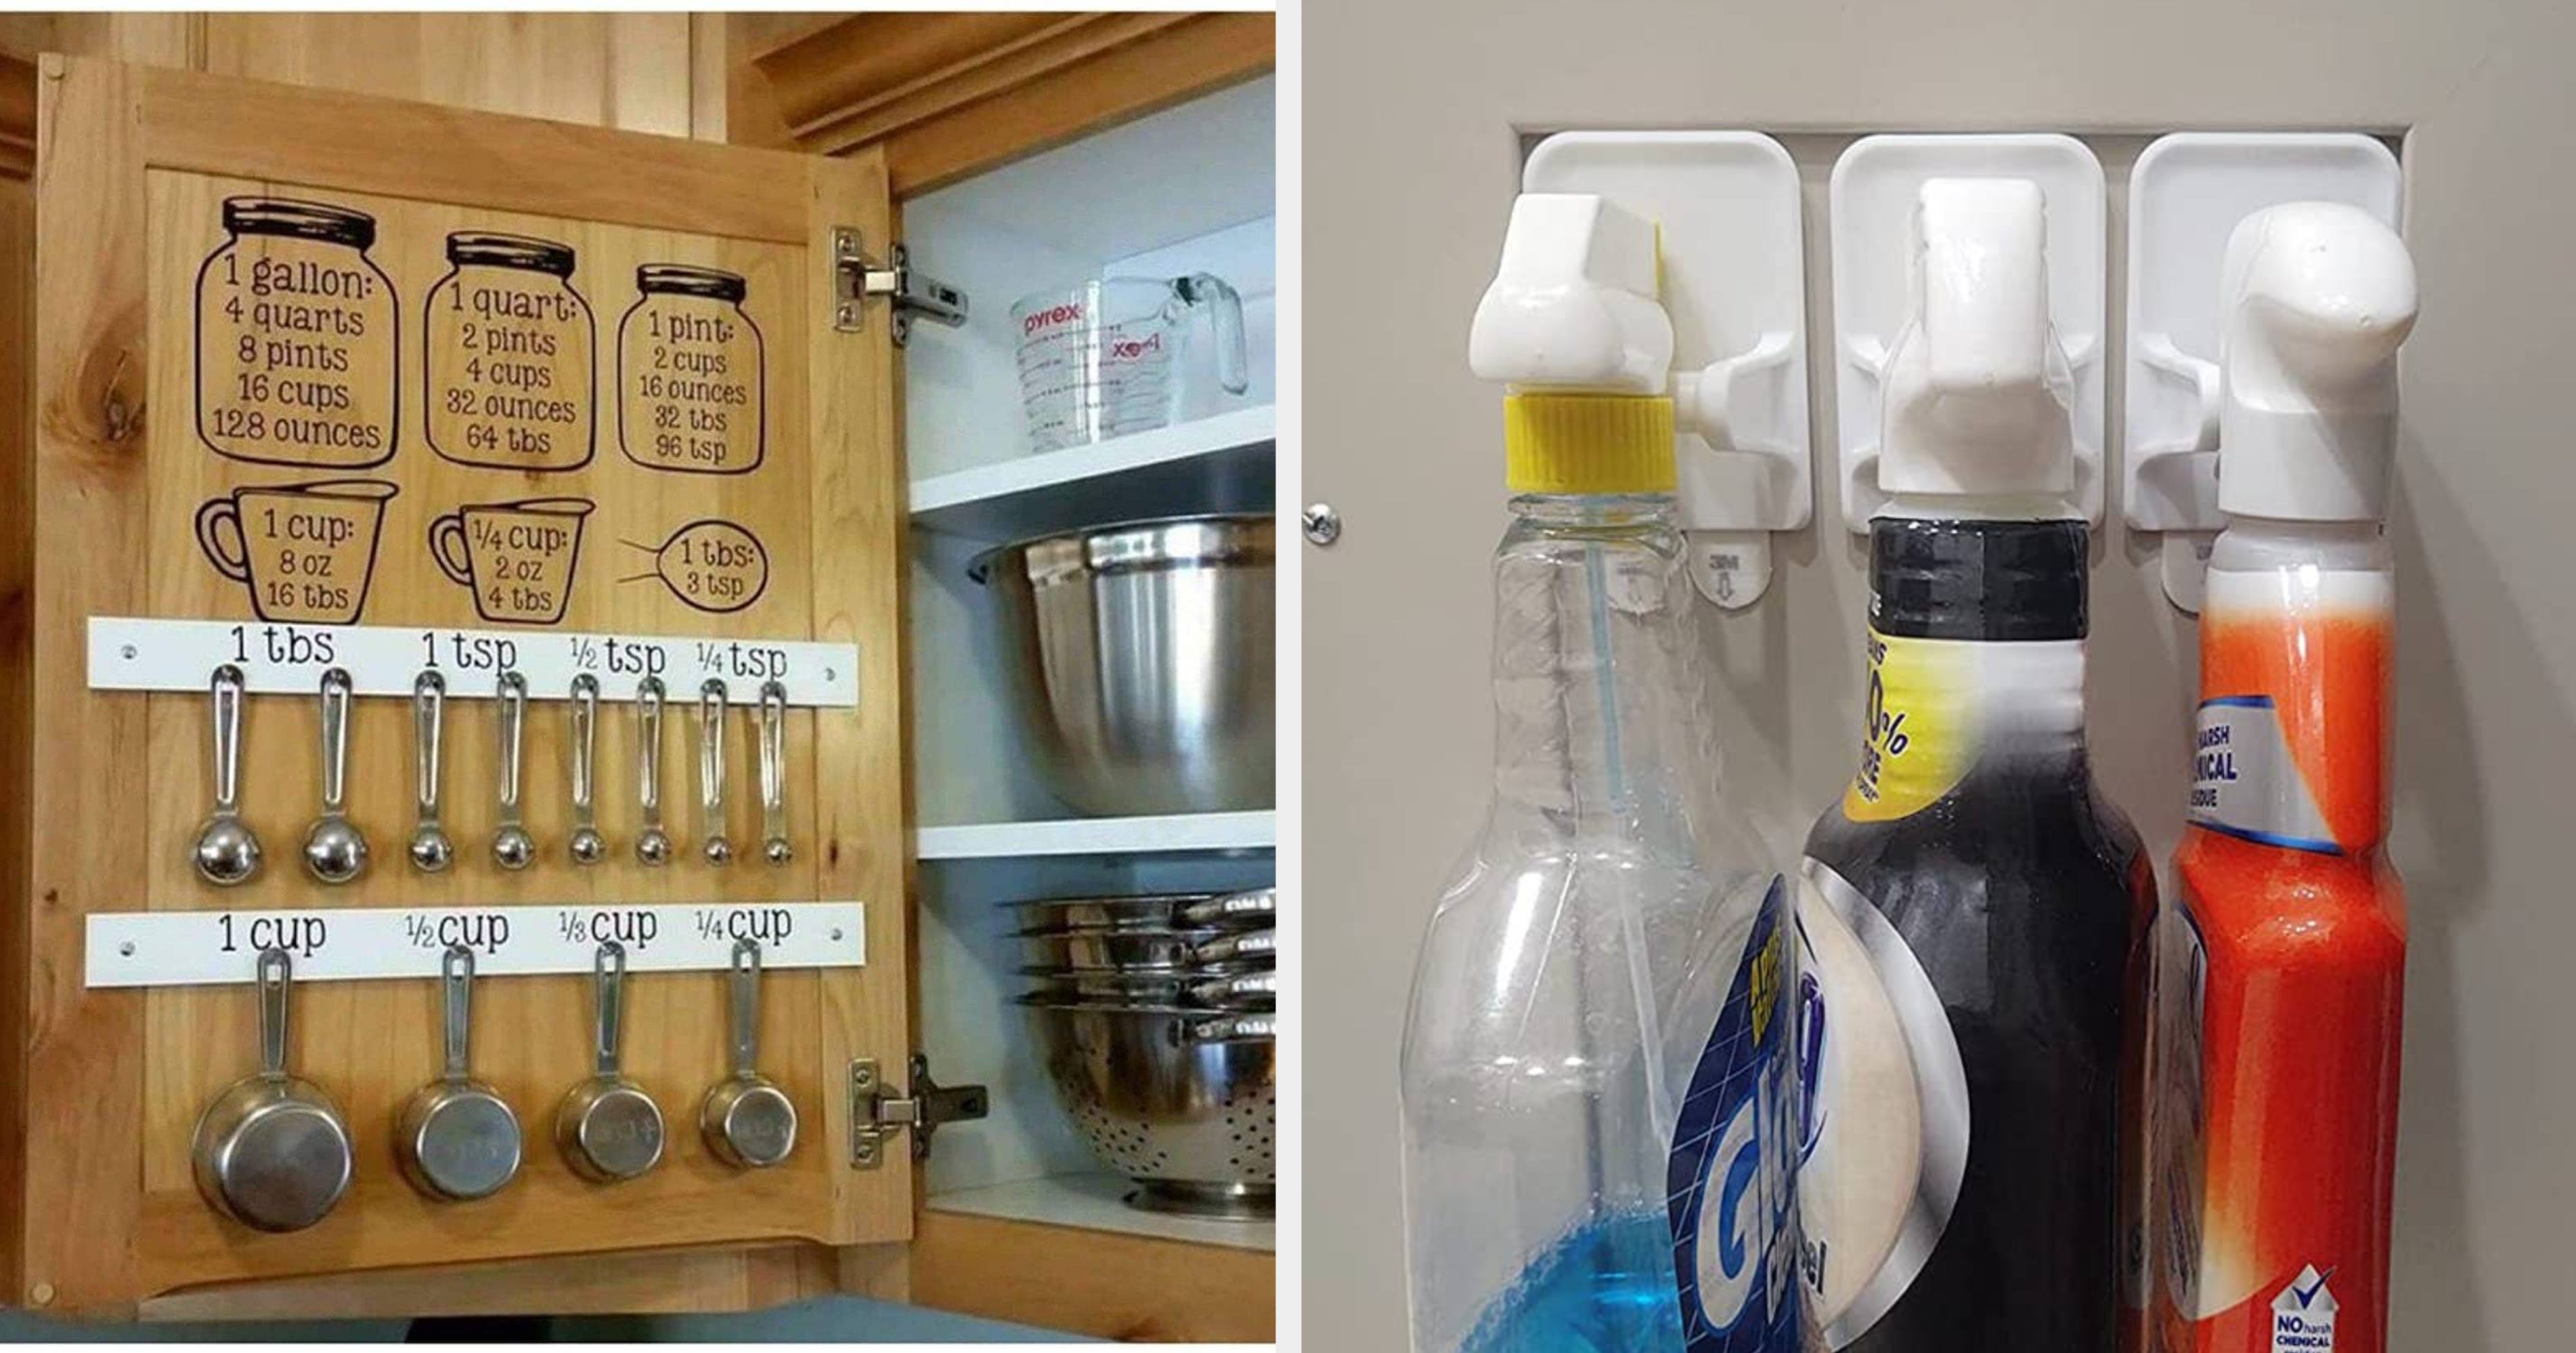 Transforming Your Pantry: The Magic of Gorilla Grip Drawer Shelf Liners, by Don Academy